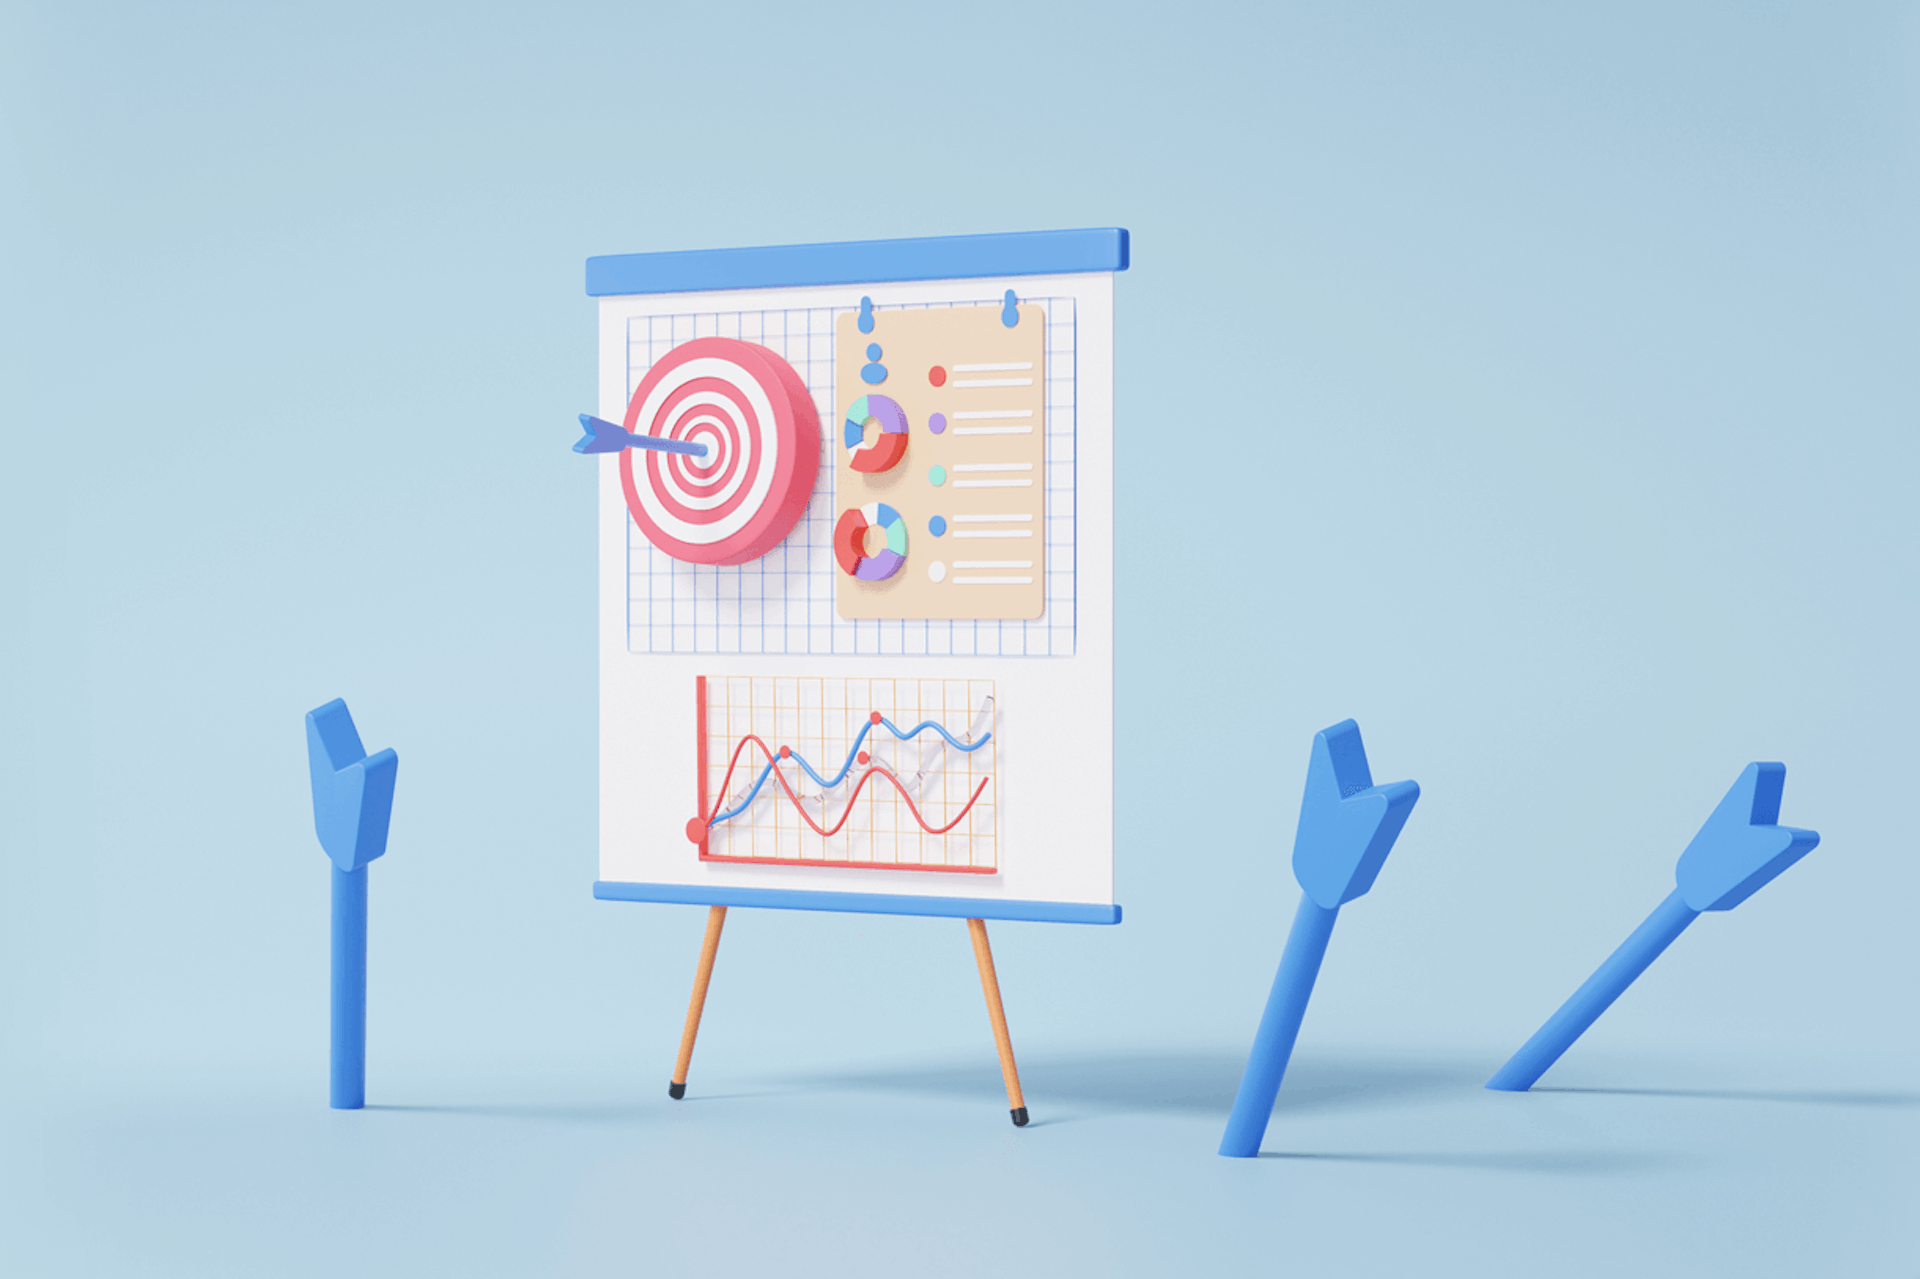 Image showing a large easel with a dart board and graphs. The dart board has a blue arrow in the bullseye and the easel is surrounded by other arrows that missed the mark. Customer intelligence analytics blog post.